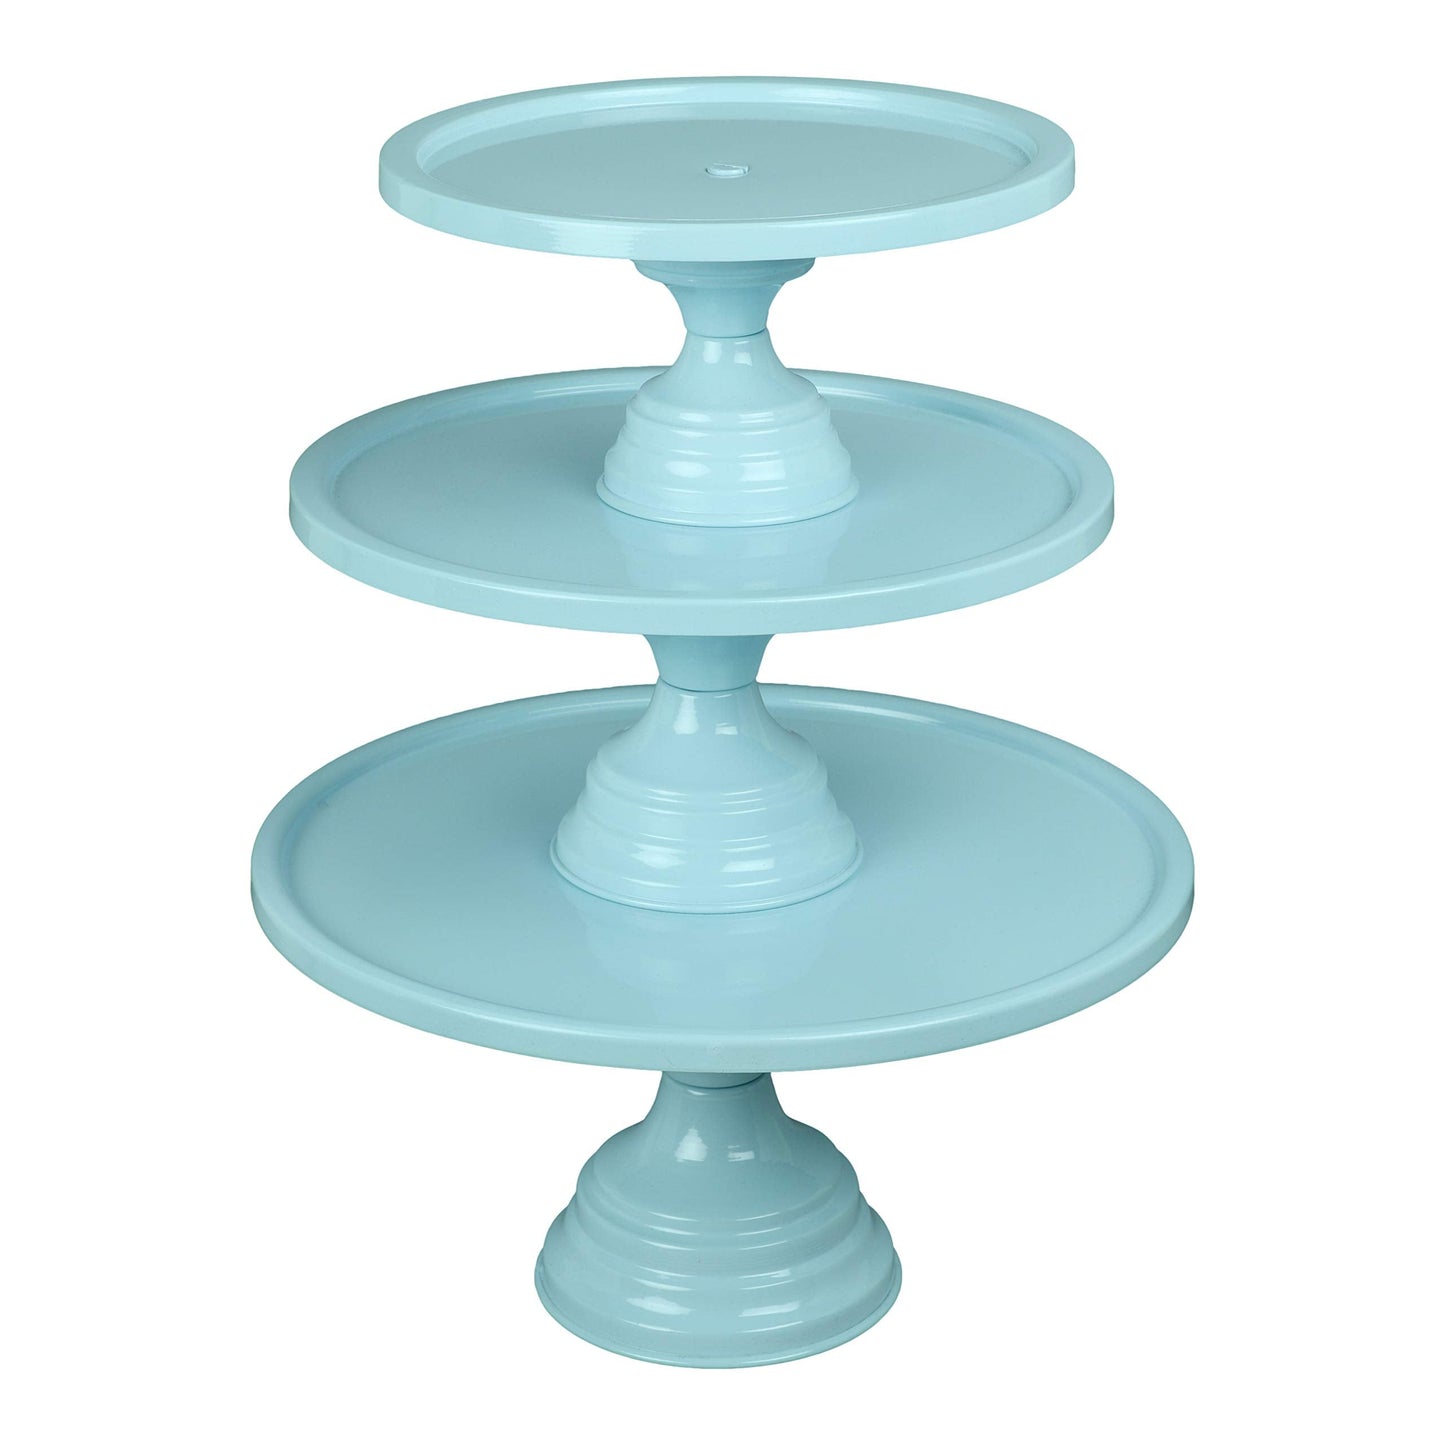 GiftBay Creations - Cake Stand Pedestal Round Strong Metal Set/3 (9-Inch, 11-Inch, 13-Inch, Blue)